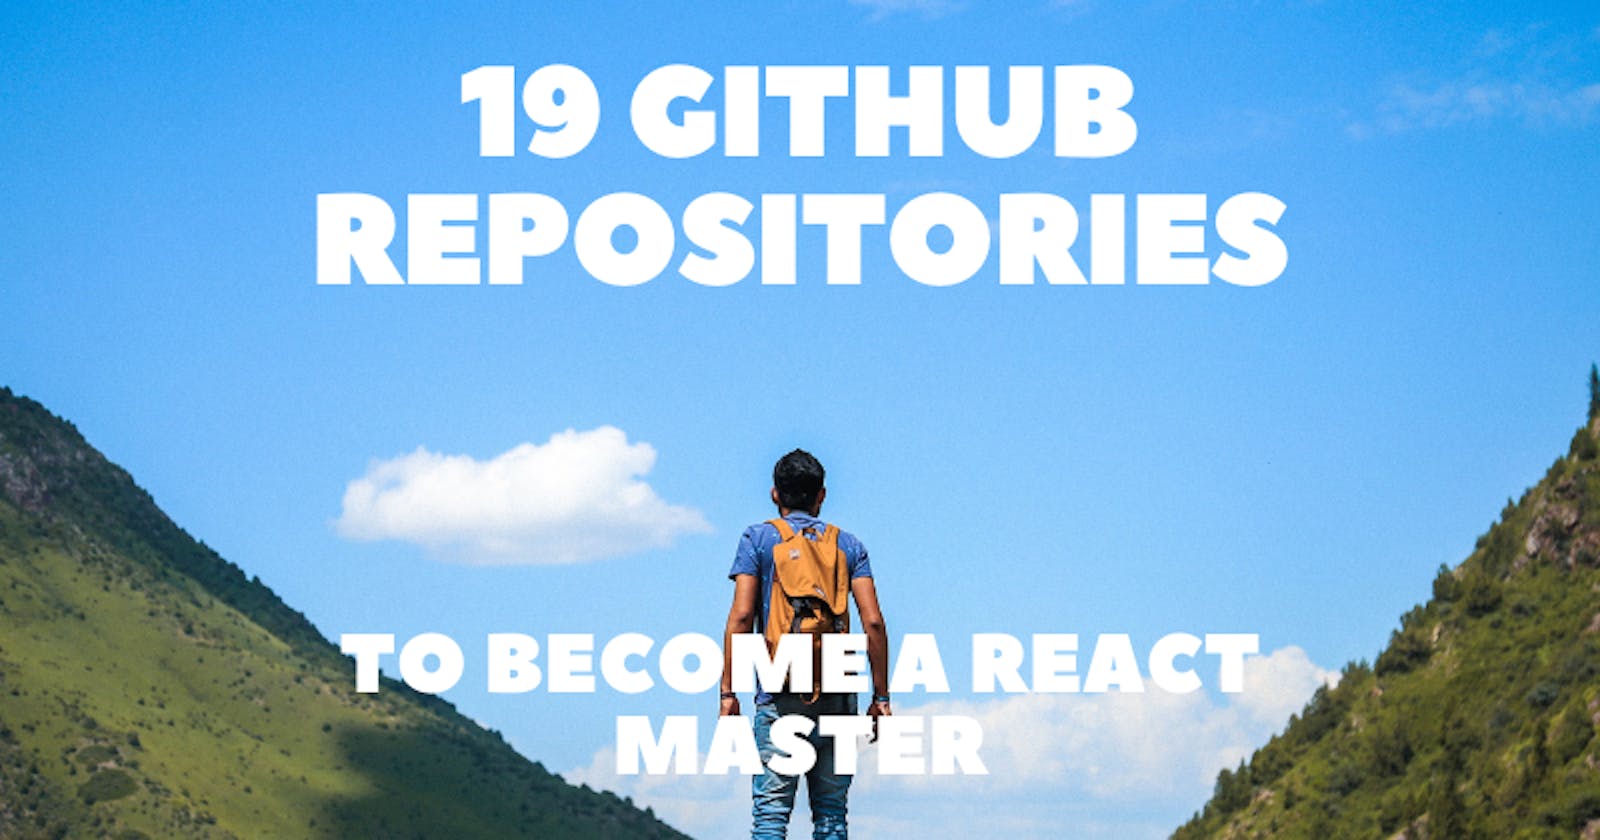 19 GitHub Repositories to Become a React Master ⚛️🧙